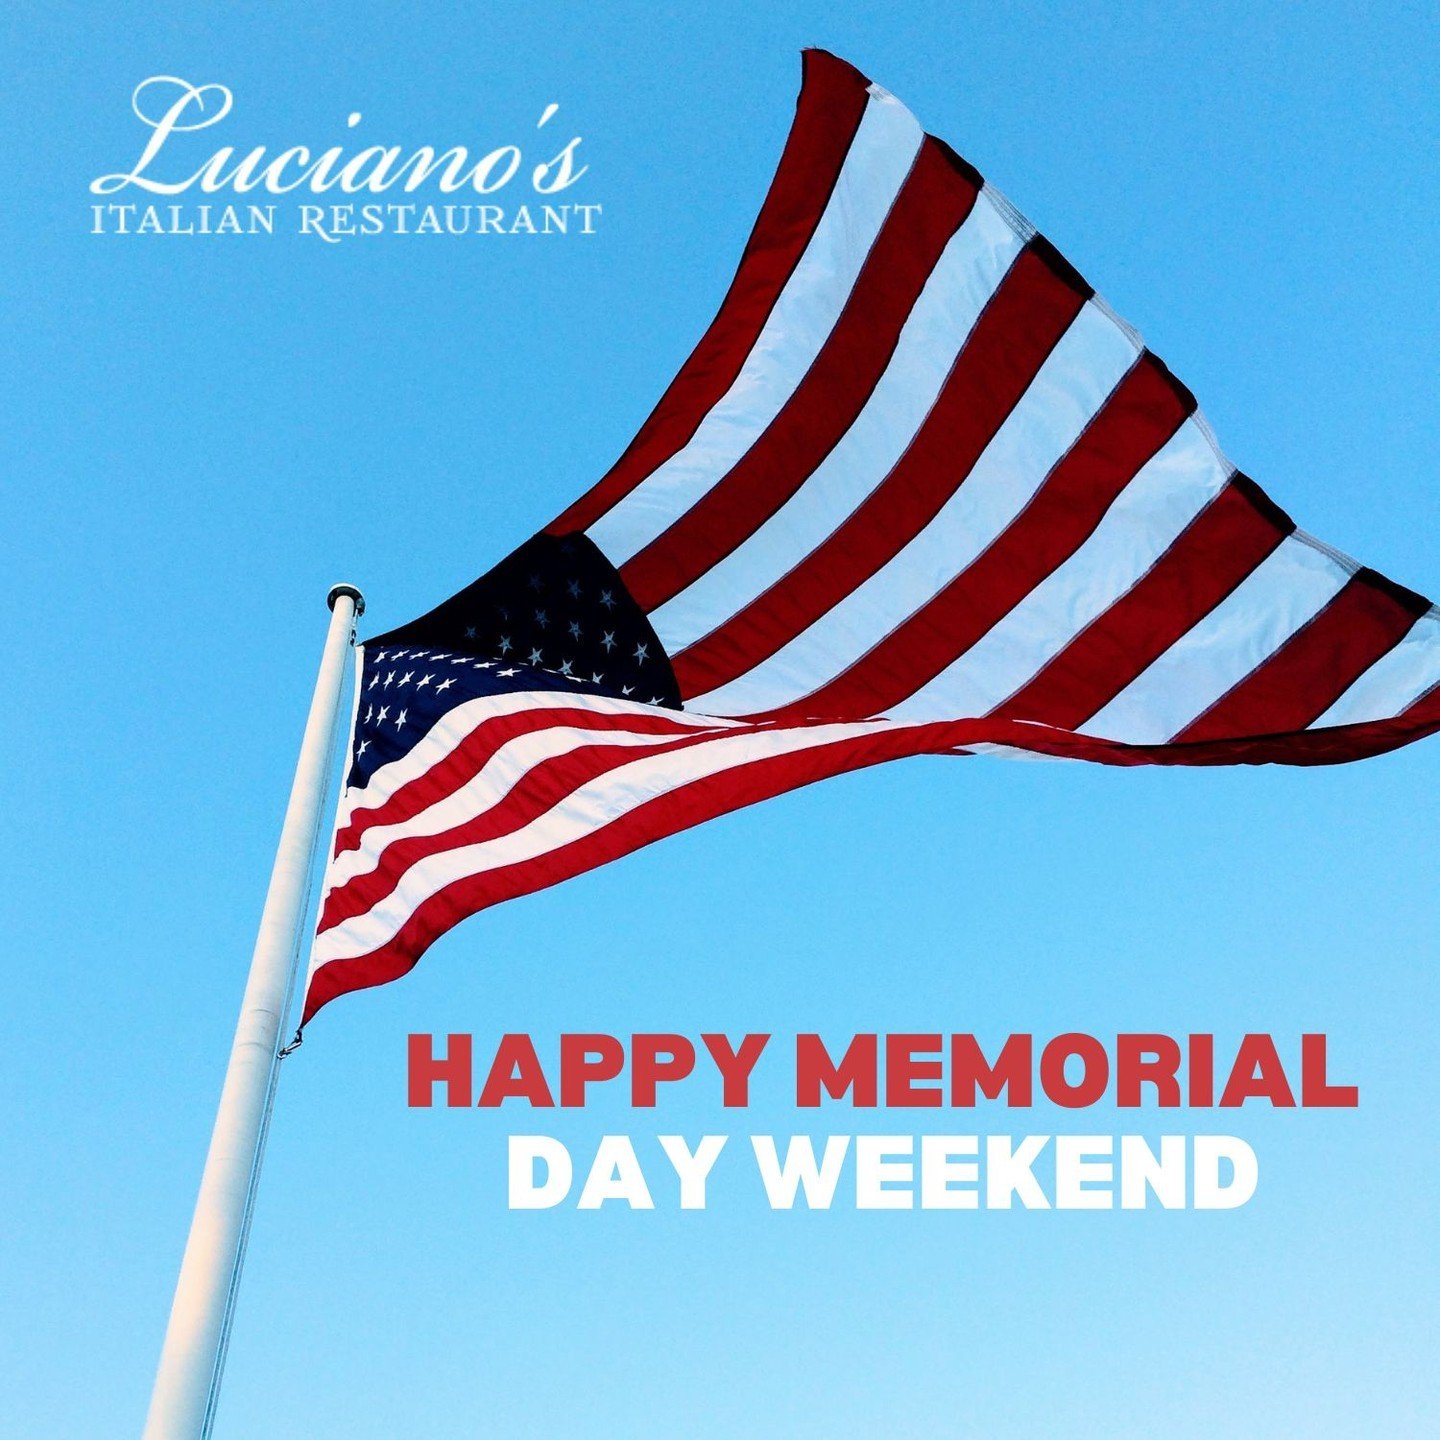 Make your Memorial Day Weekend memorable at Luciano's! We're here Friday and Saturday, off Sunday and Monday.